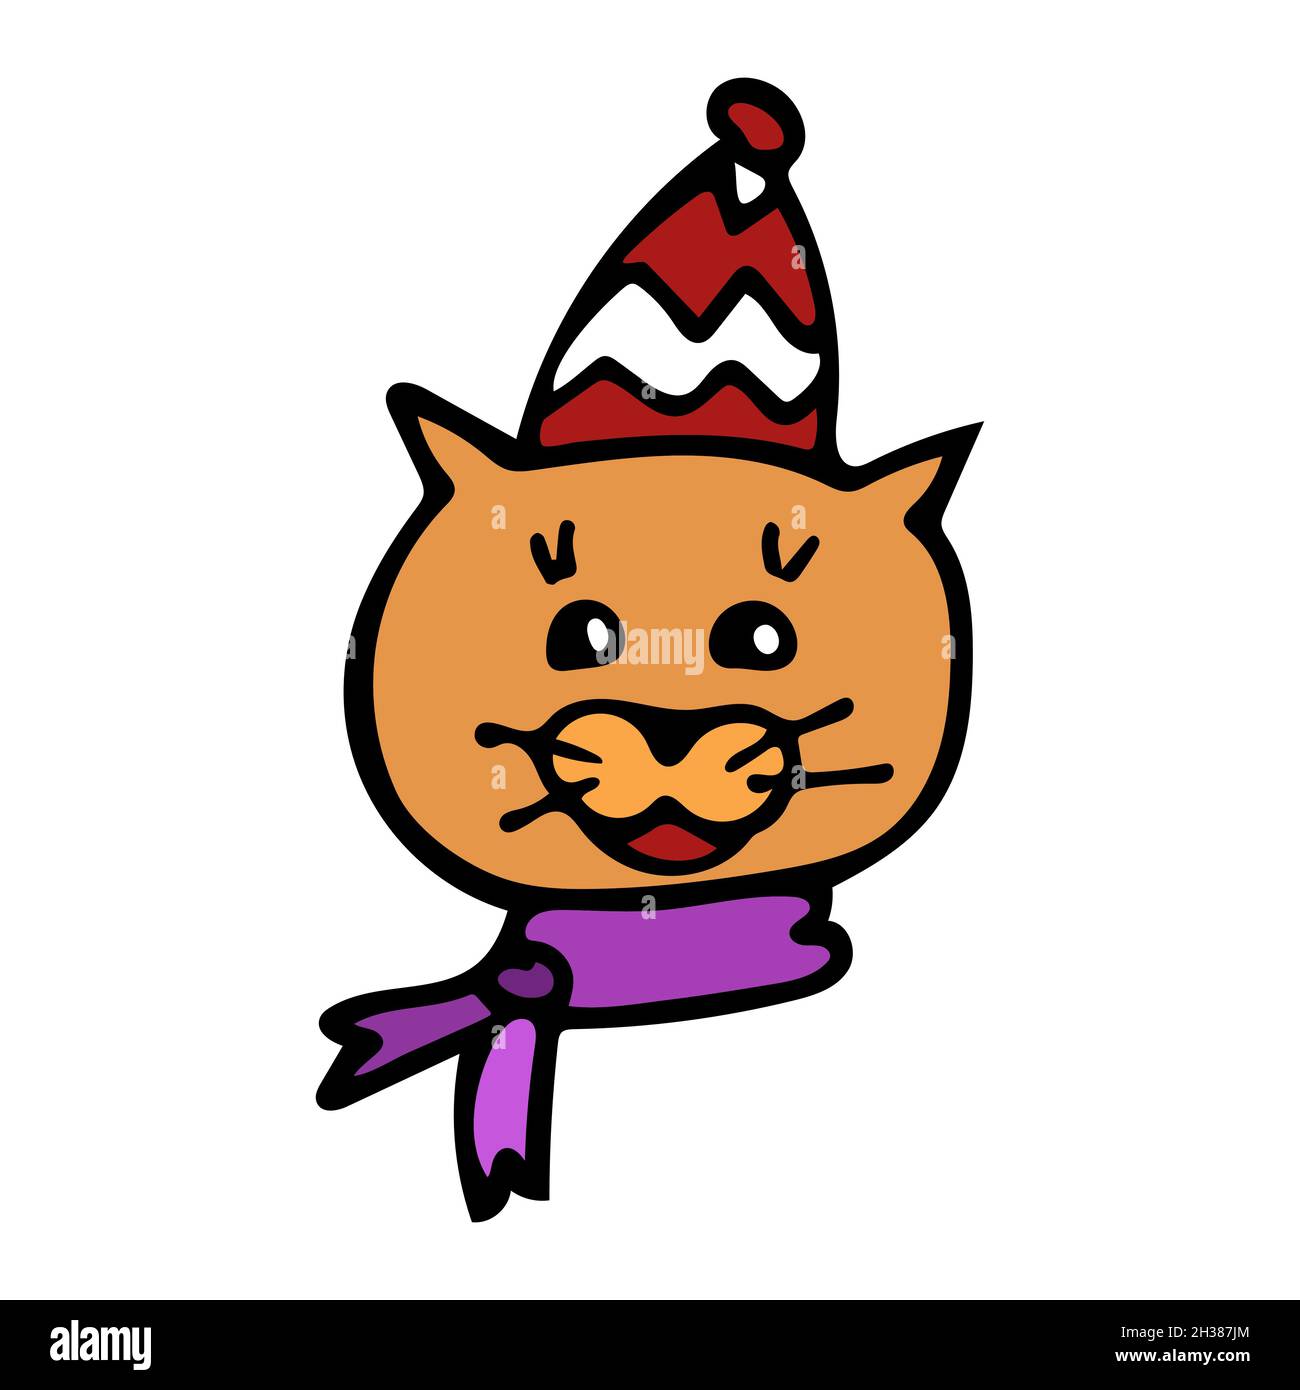 A cheerful Red Cat is smiling in a red and white hat and a purple scarf in the style of a cartoon. Stock Vector